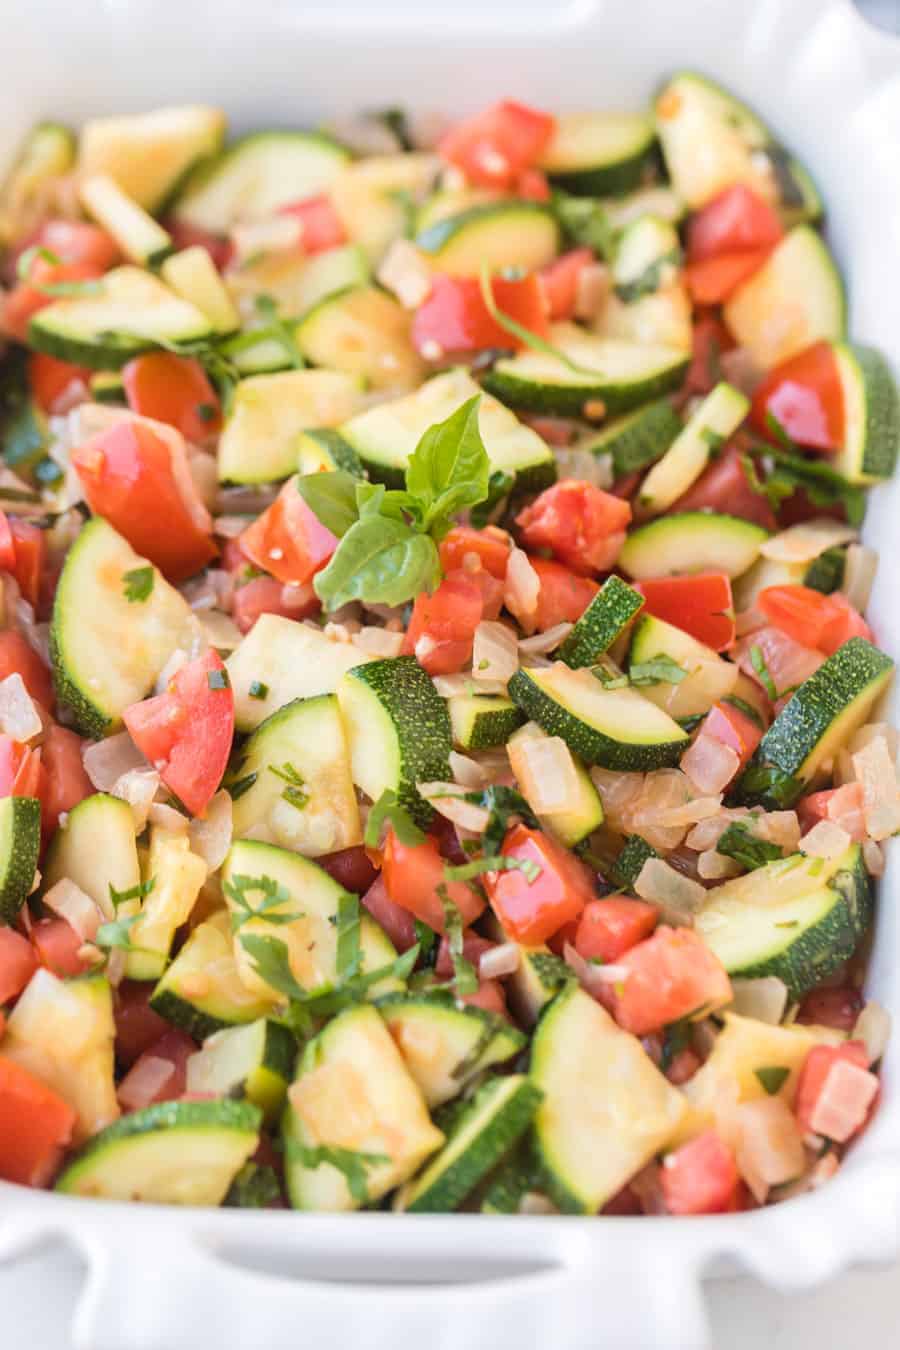 This zucchini side dish is full of onion, tomato, herbs, and of course zucchini to make a bright and fresh side that tastes out-of-this-world delicious! #zucchini #zucchiniside #easyzucchinirecipe #zucchinimedley